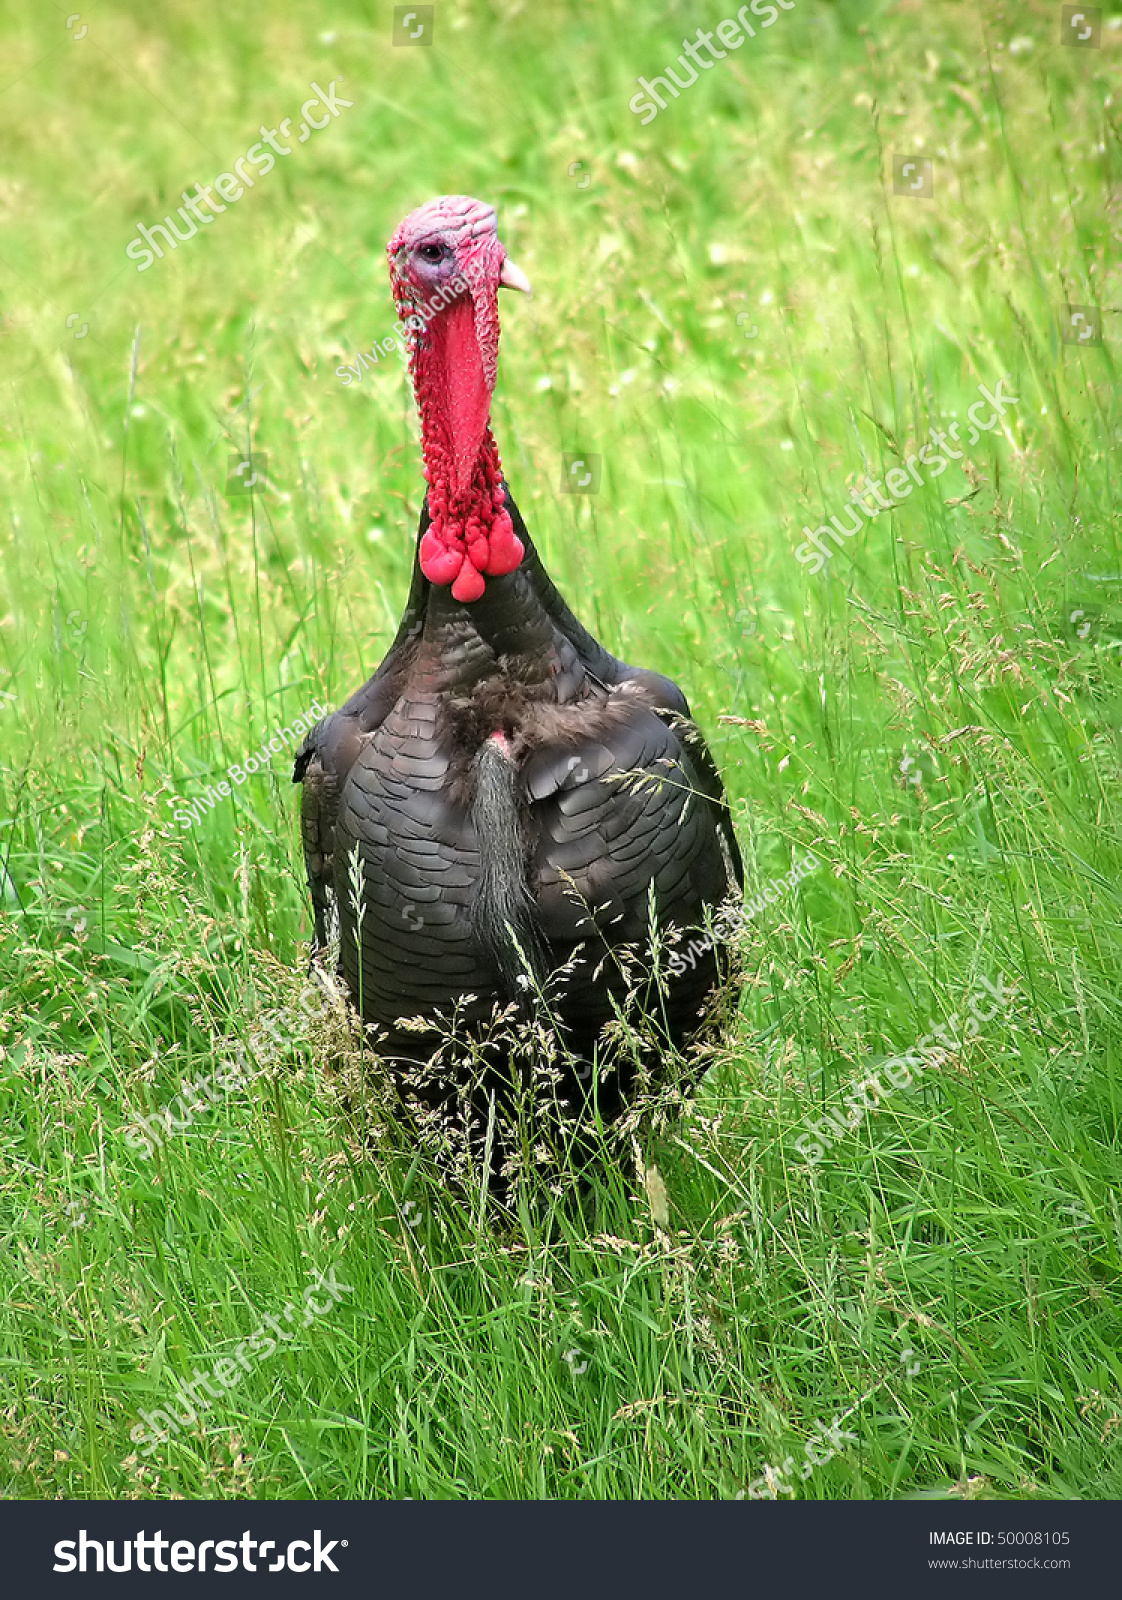 Funny Male Wild Turkey With Long Neck Looking At Camera While Standing